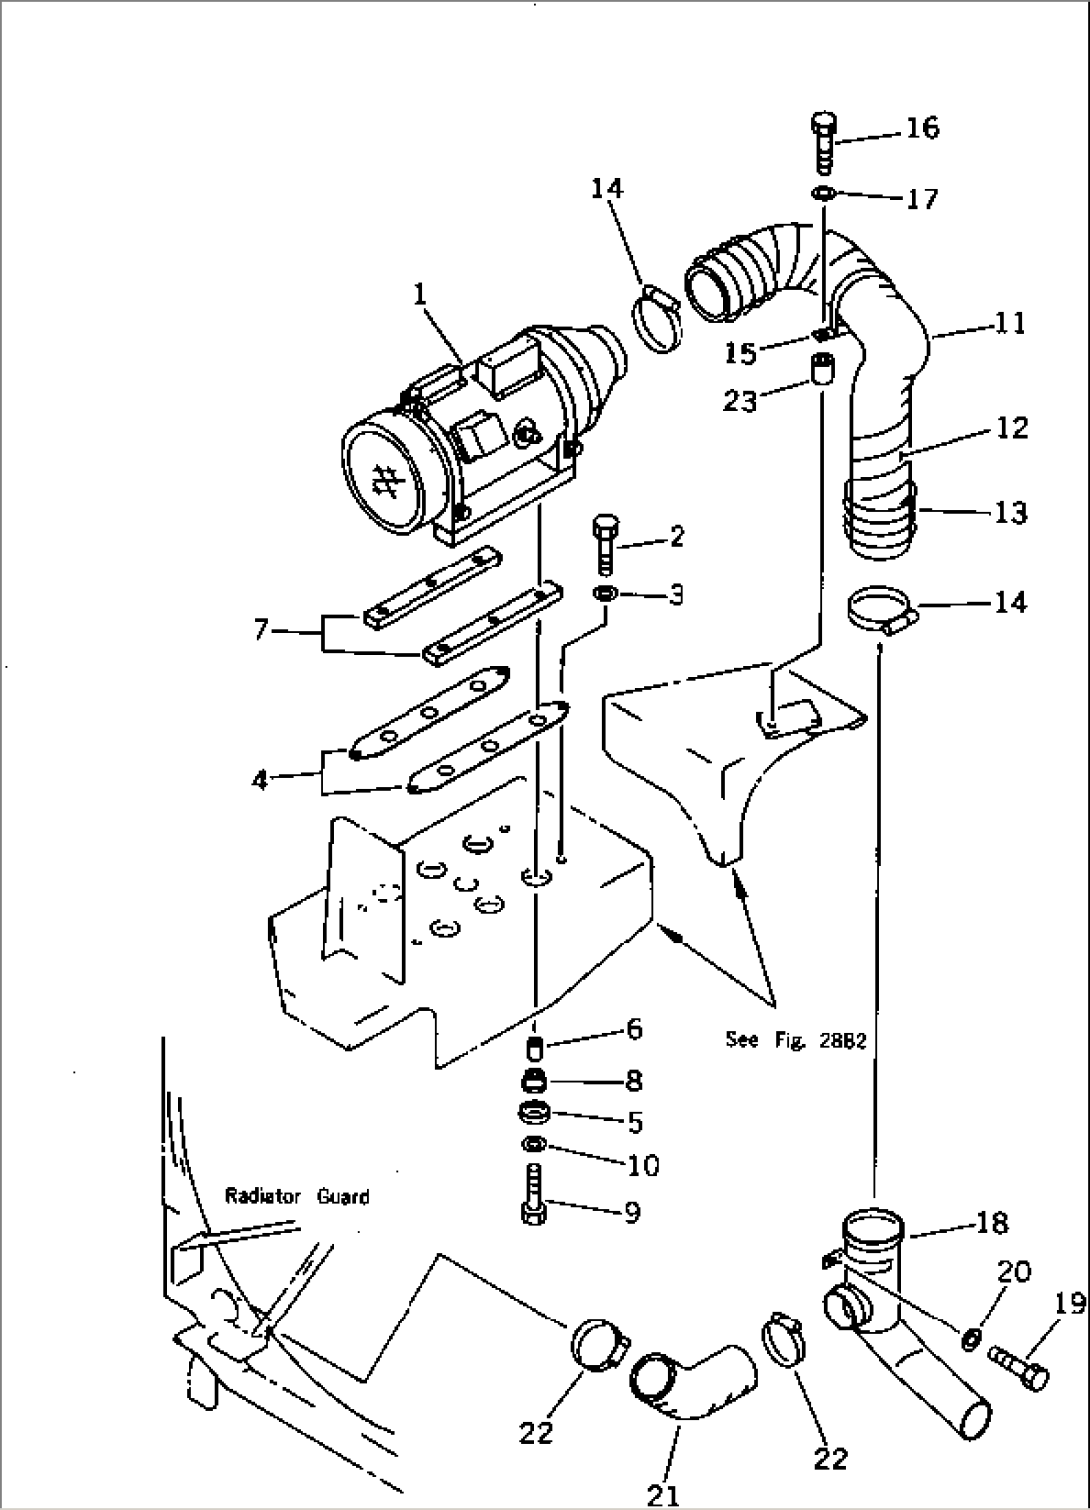 ROCKET HEATER AND DUCT(#12626-)